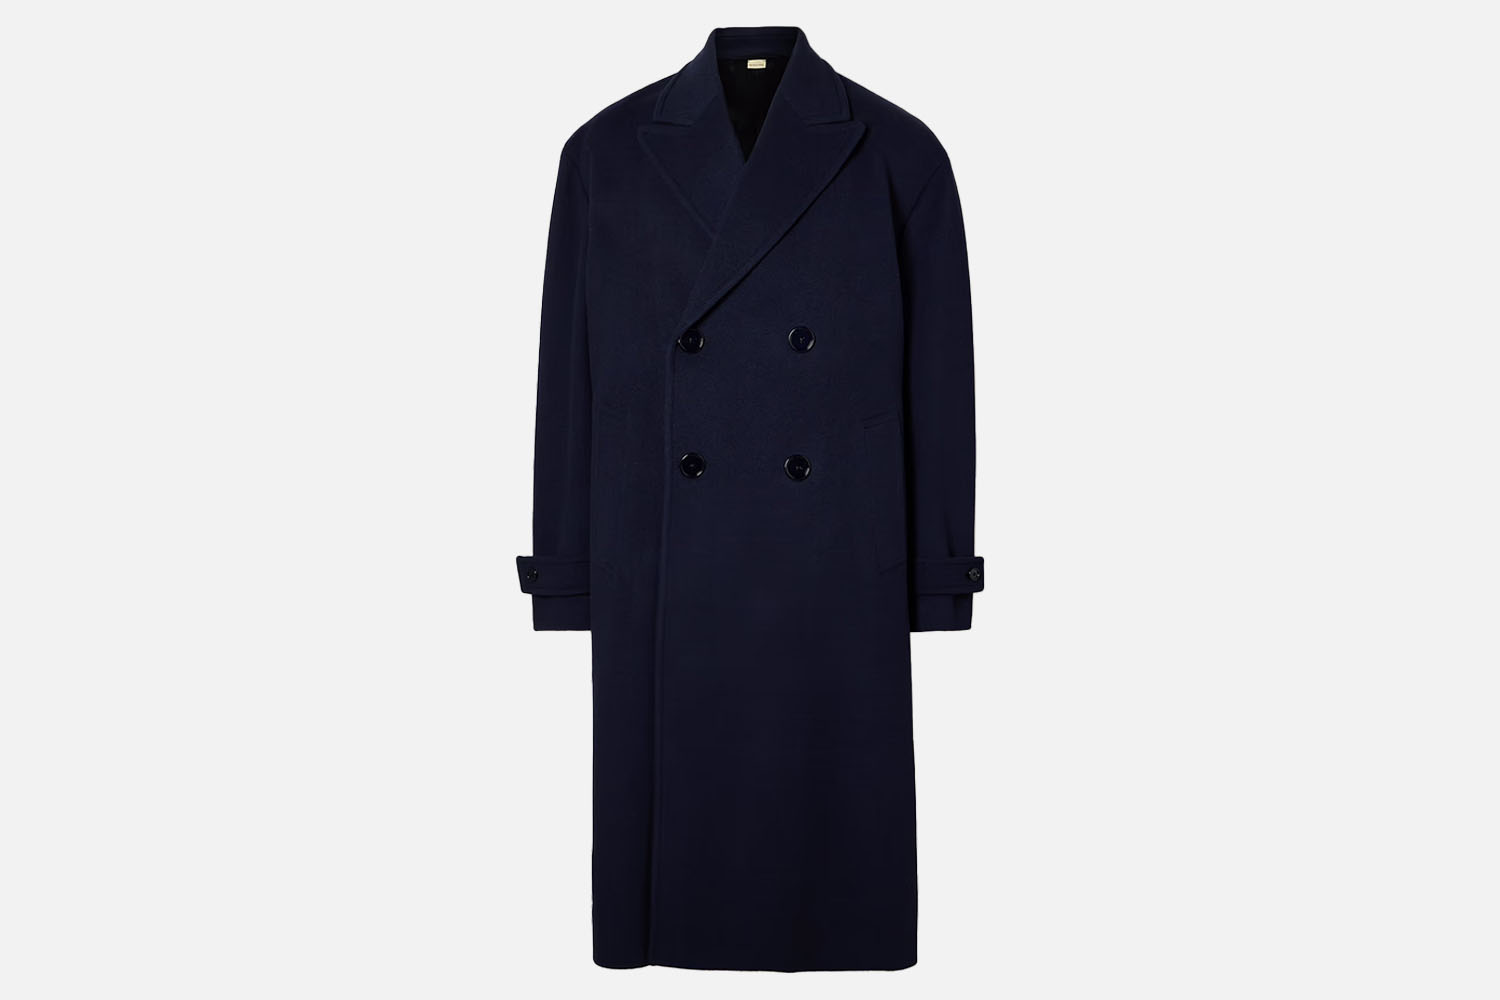 Todd Snyder Italian Oversized Double Breasted Topcoat in Charcoal